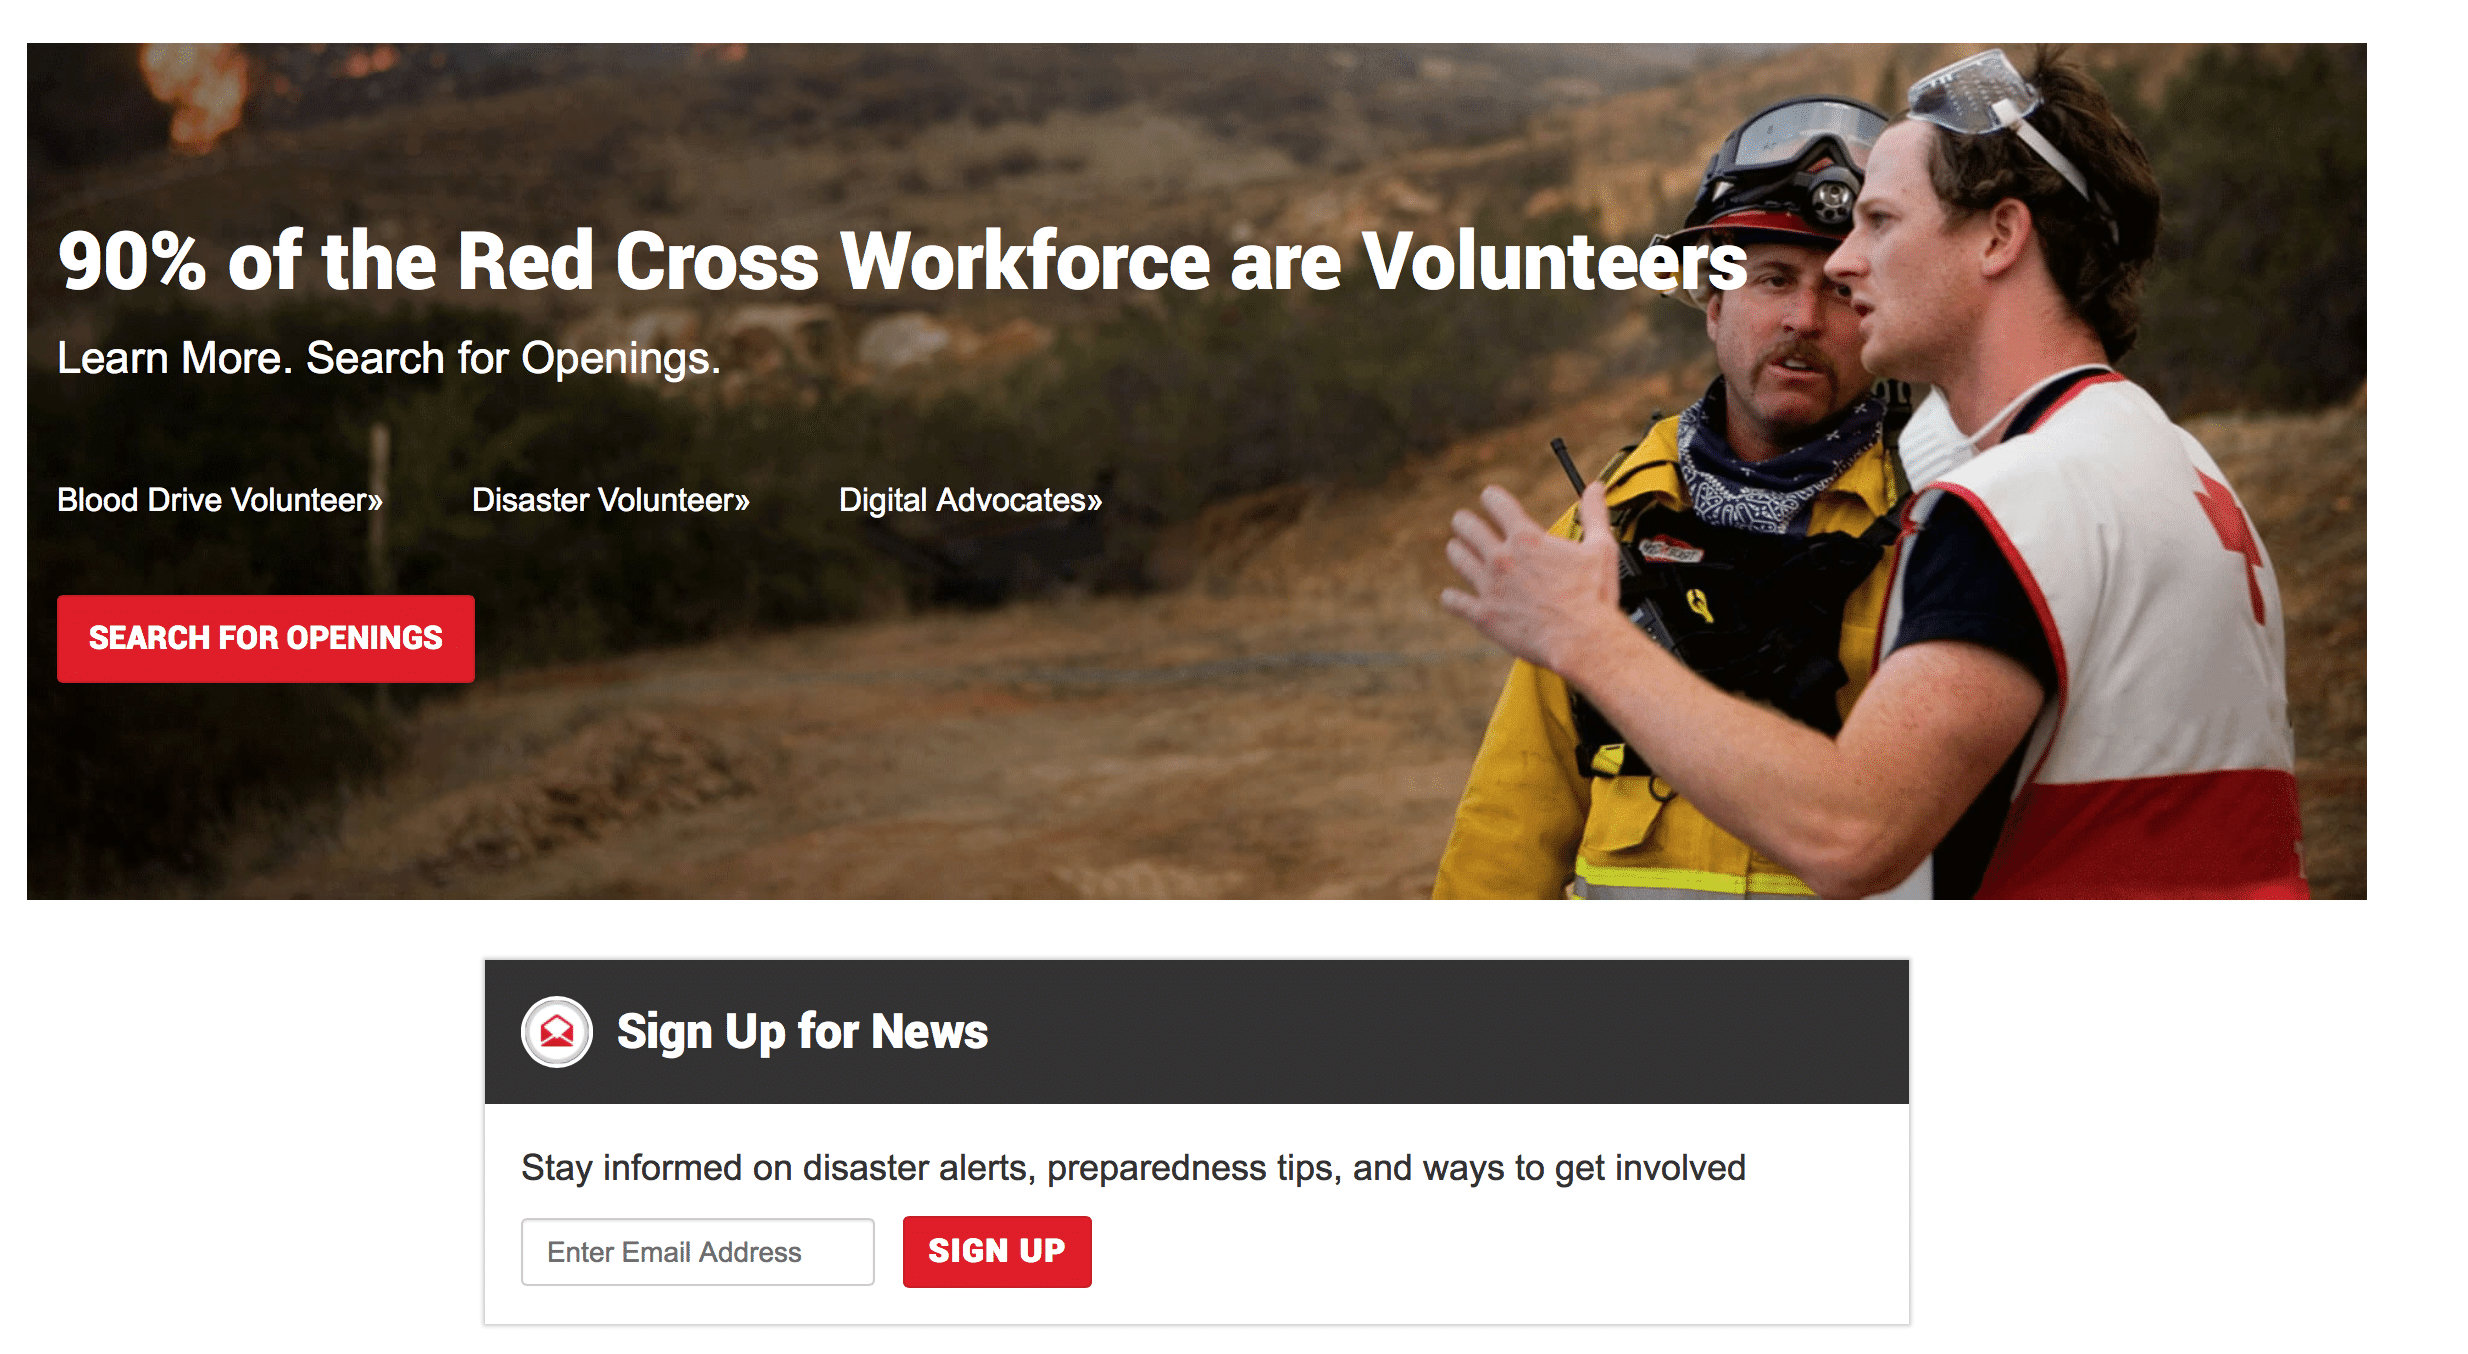 The American Red Cross email sign up form